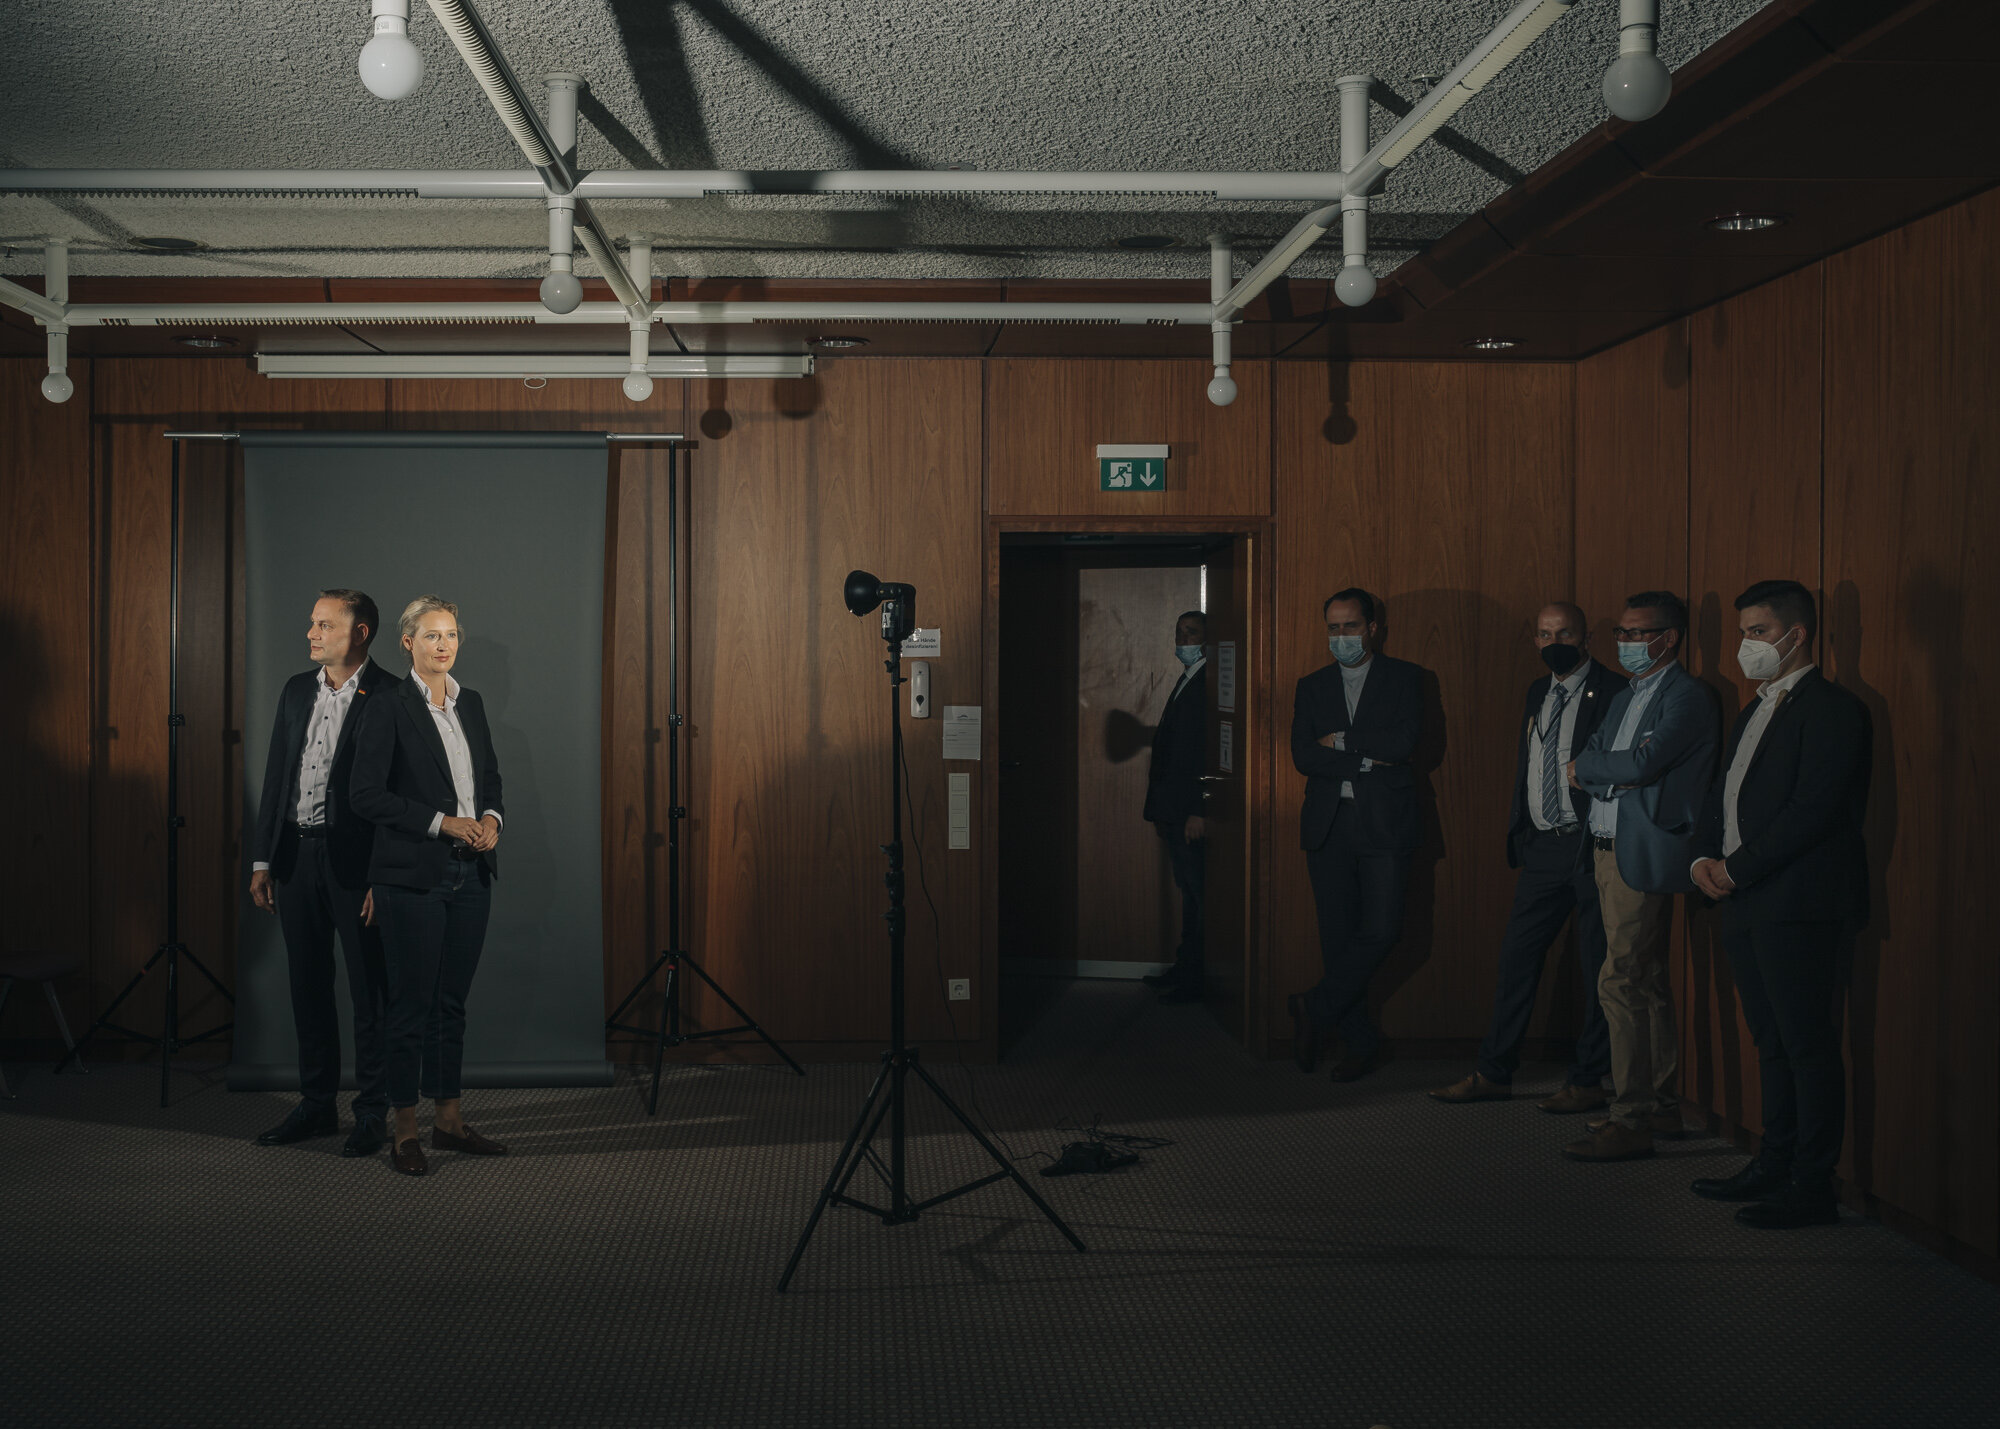  The top duo of the AFD, Tino Chrupalla and Alice Weidel pose for a portrait during an election campaign event. Bodyguards as well as assistants of the politicians wait on the right. 